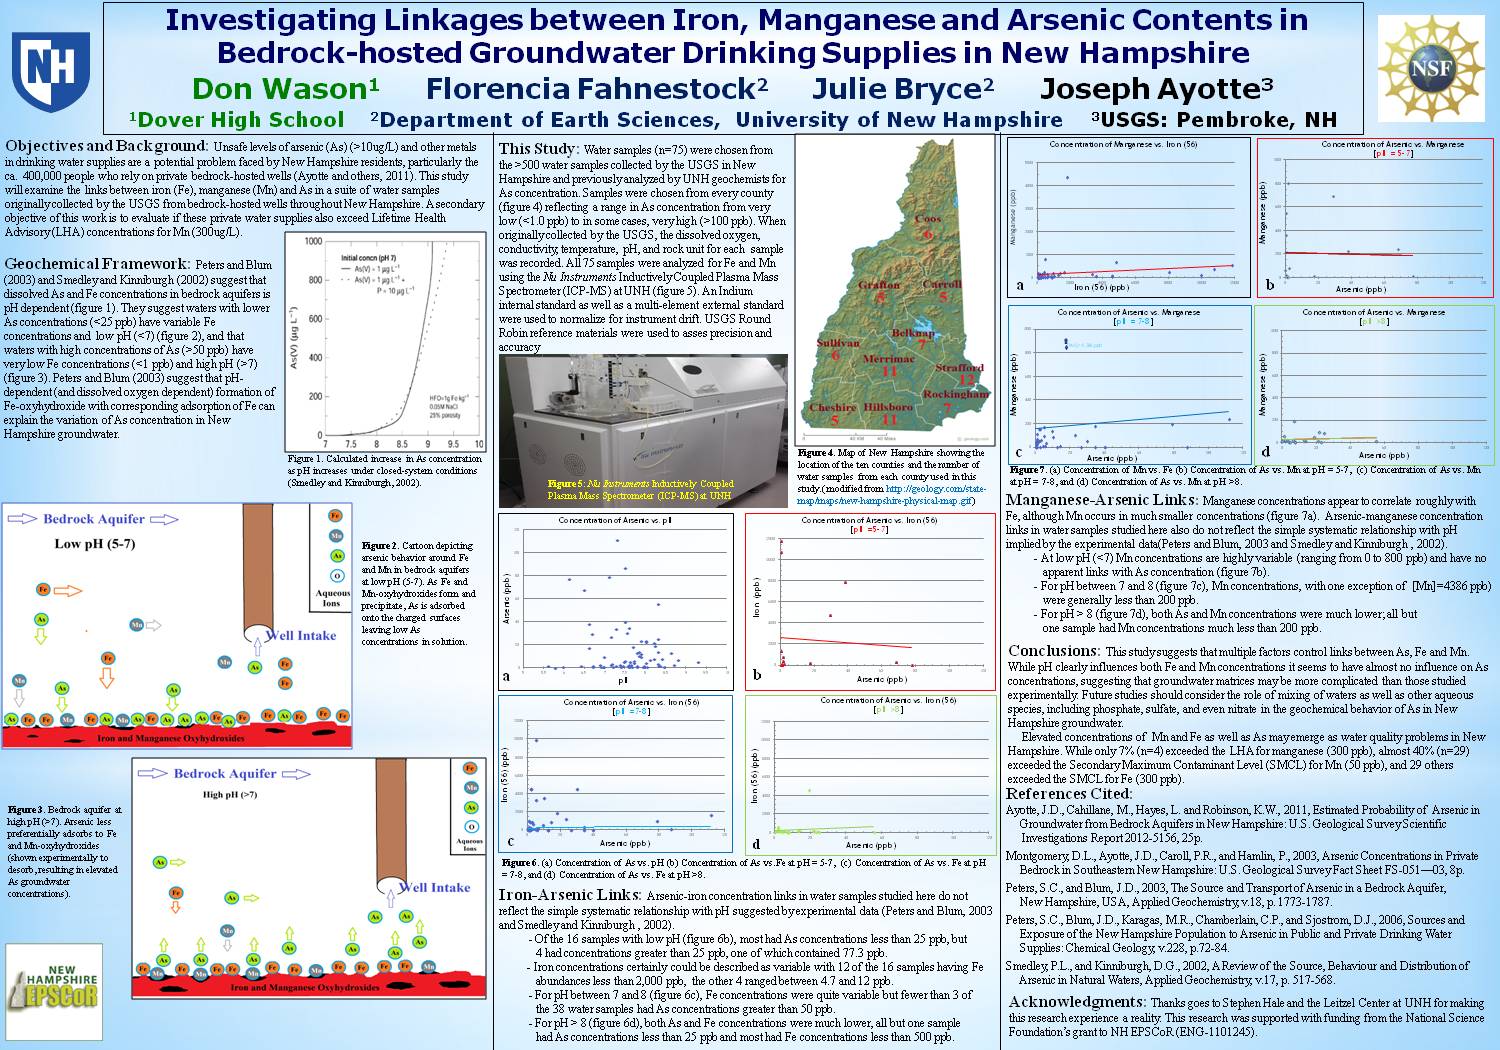 Investigating Linkages Between Iron, Manganese And Arsenic Contents In Bedrock-Hosted Groundwater Drinking Supplies In New Hampshire by dwason